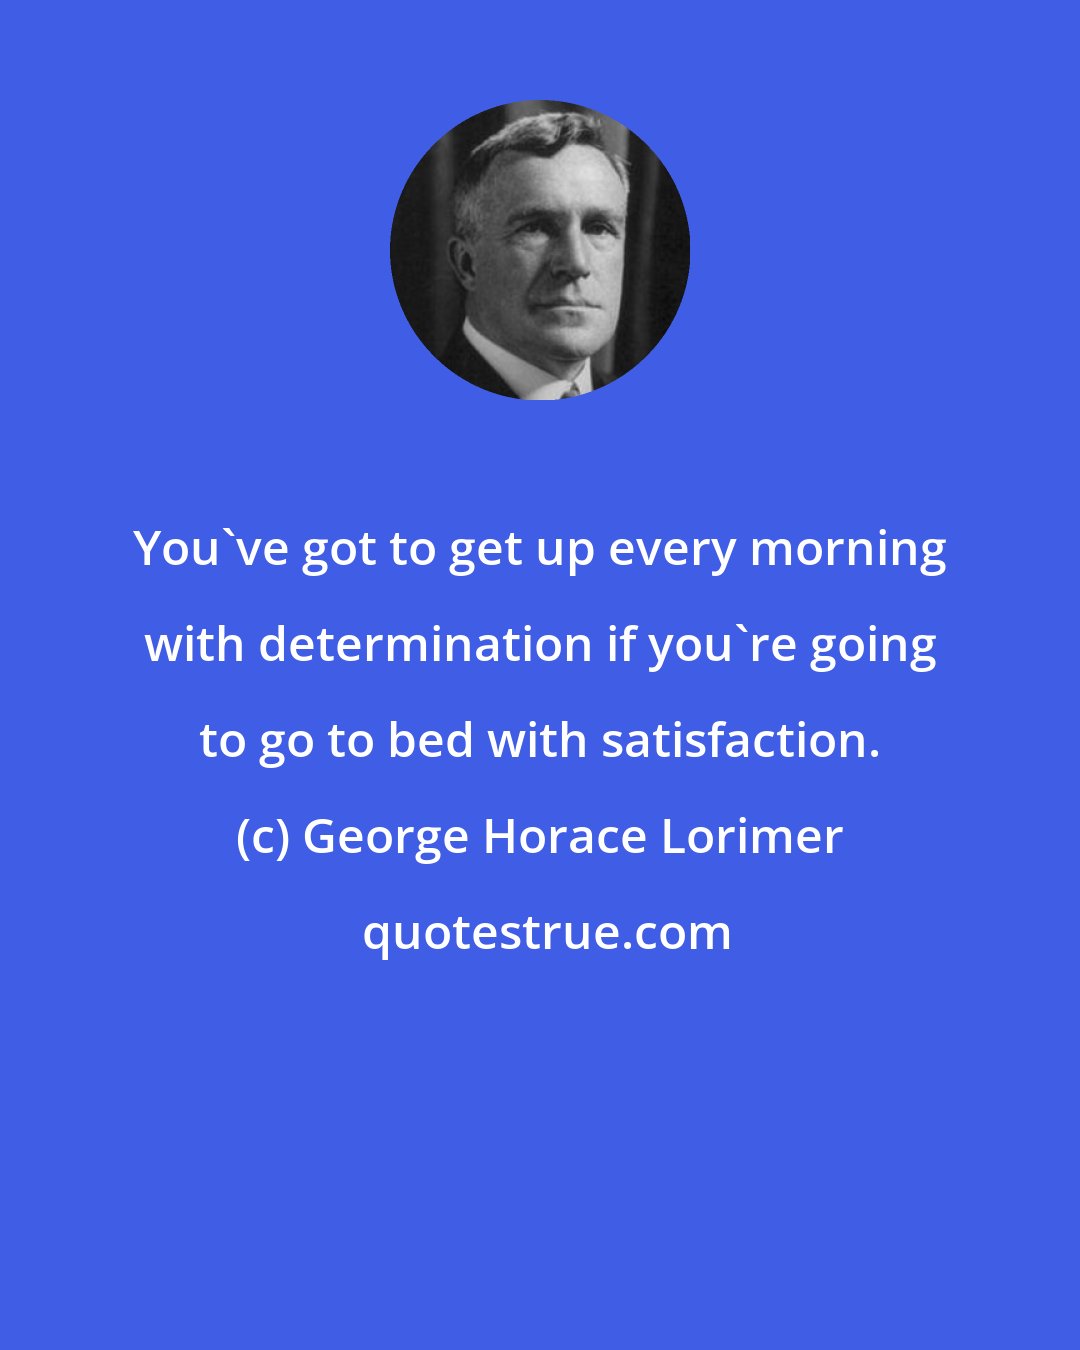 George Horace Lorimer: You've got to get up every morning with determination if you're going to go to bed with satisfaction.